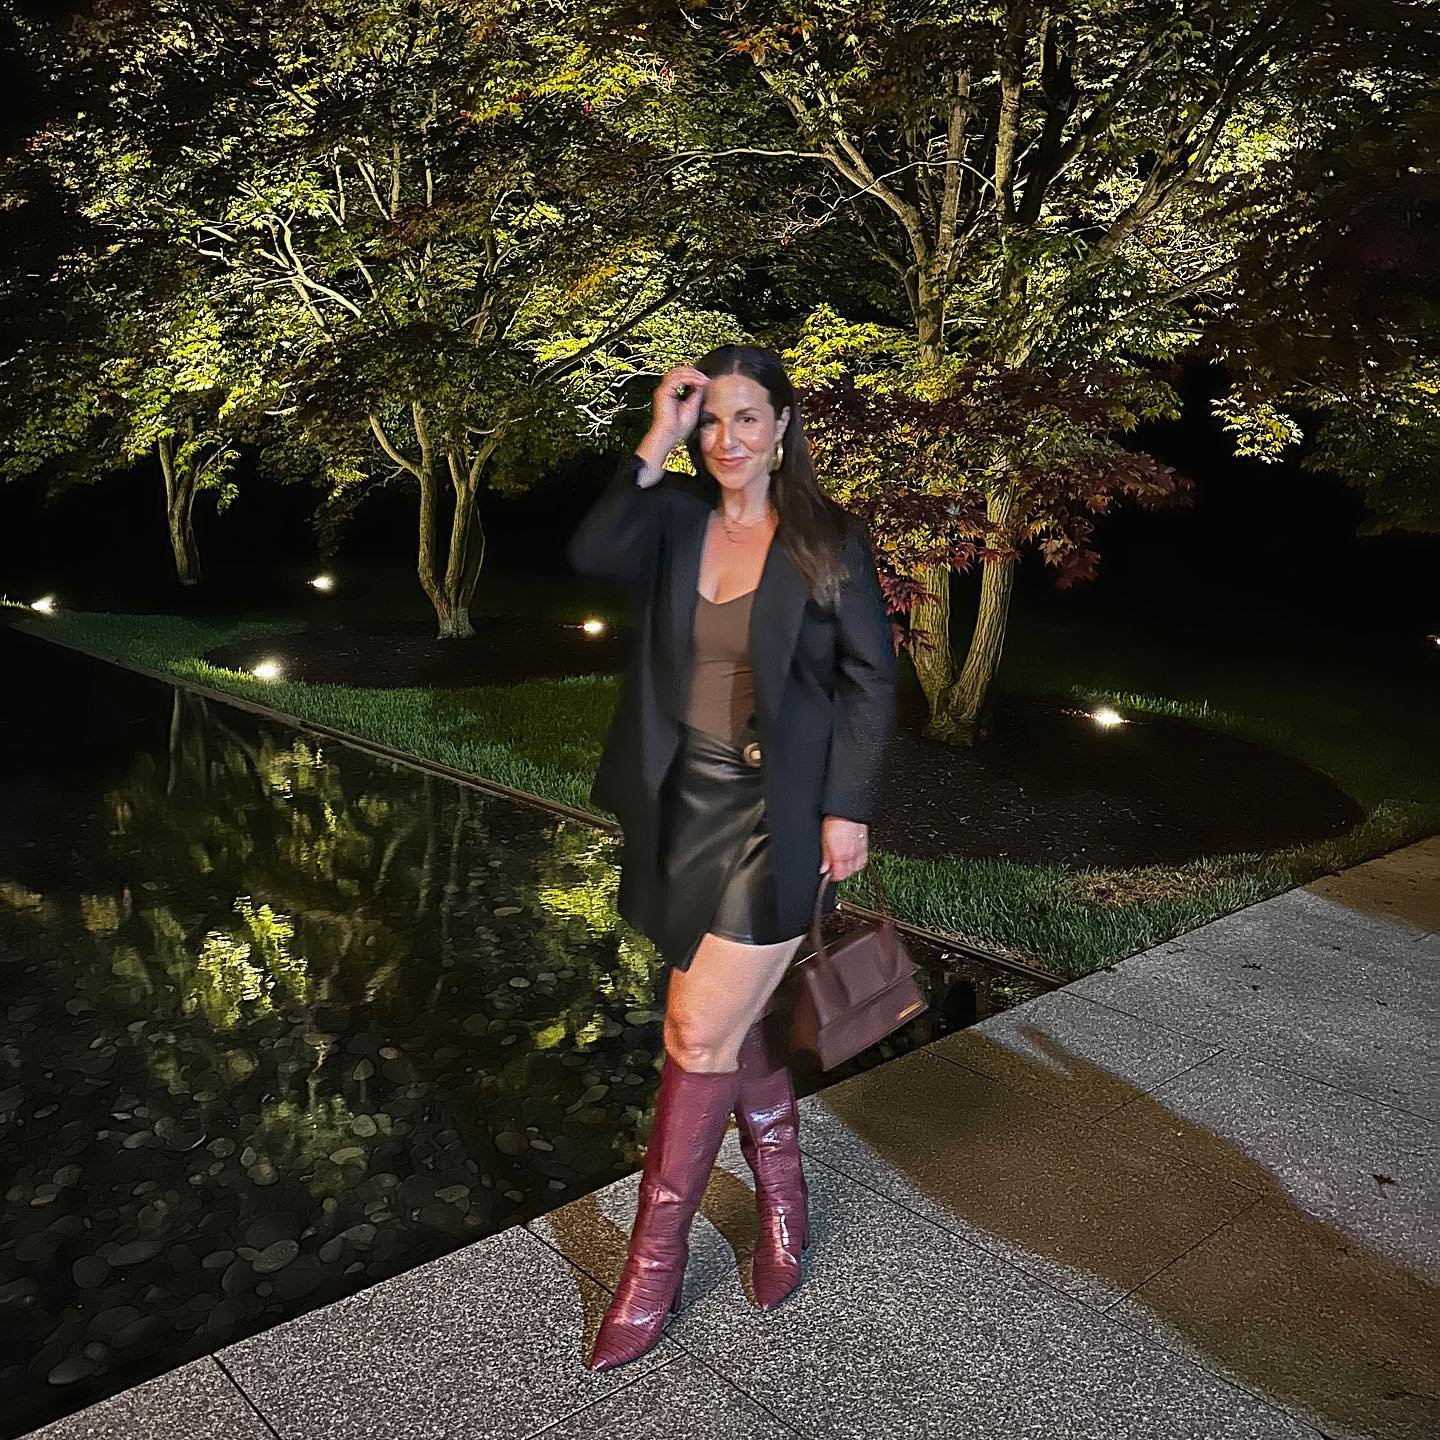 A night at the museum ✨ 
.
.
.
#phillynights #phillynetworkingevents #barnesfoundation #youngprofessional #youngprofessionalsnetwork #phillyfitness #girlsnightoutfit #midsizefashion #girlsnightout #midsizestyle #maincharacterenergy